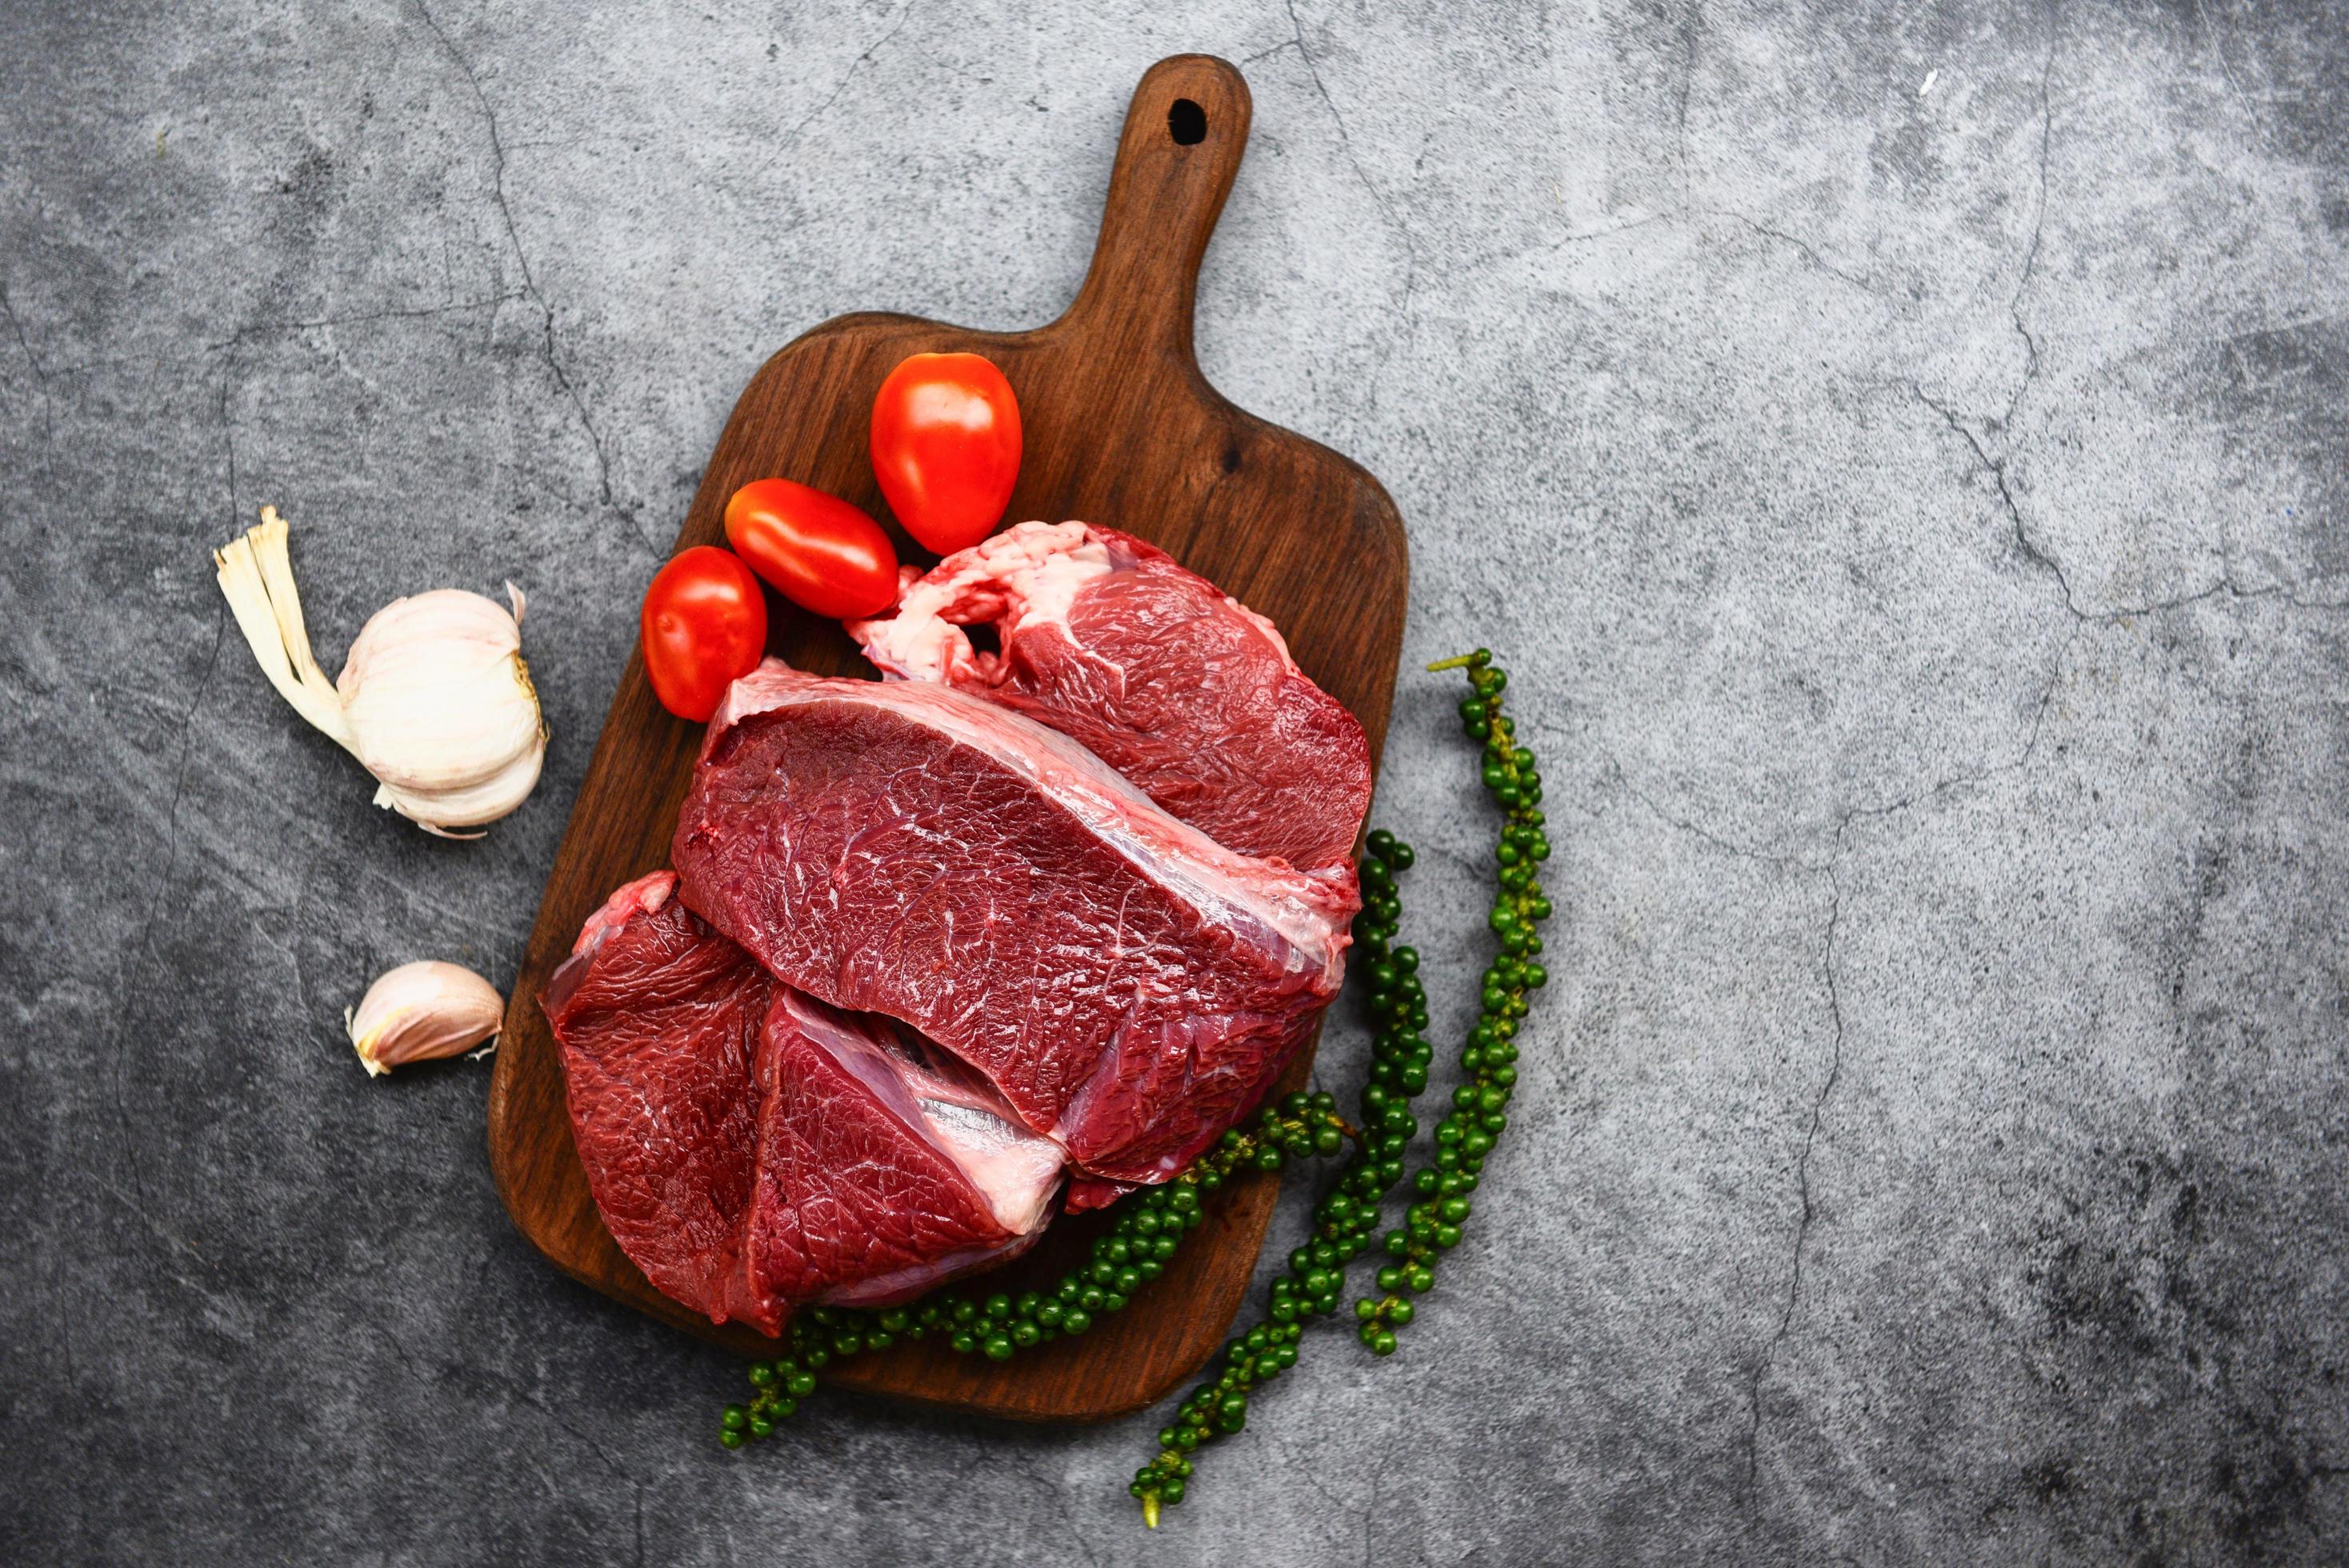 Fresh beef animal protein - Raw beef meat on wooden cutting board on the  kitchen table for cooking beef steak roasted or grilled with ingredients  herb and spices 5192559 Stock Photo at Vecteezy